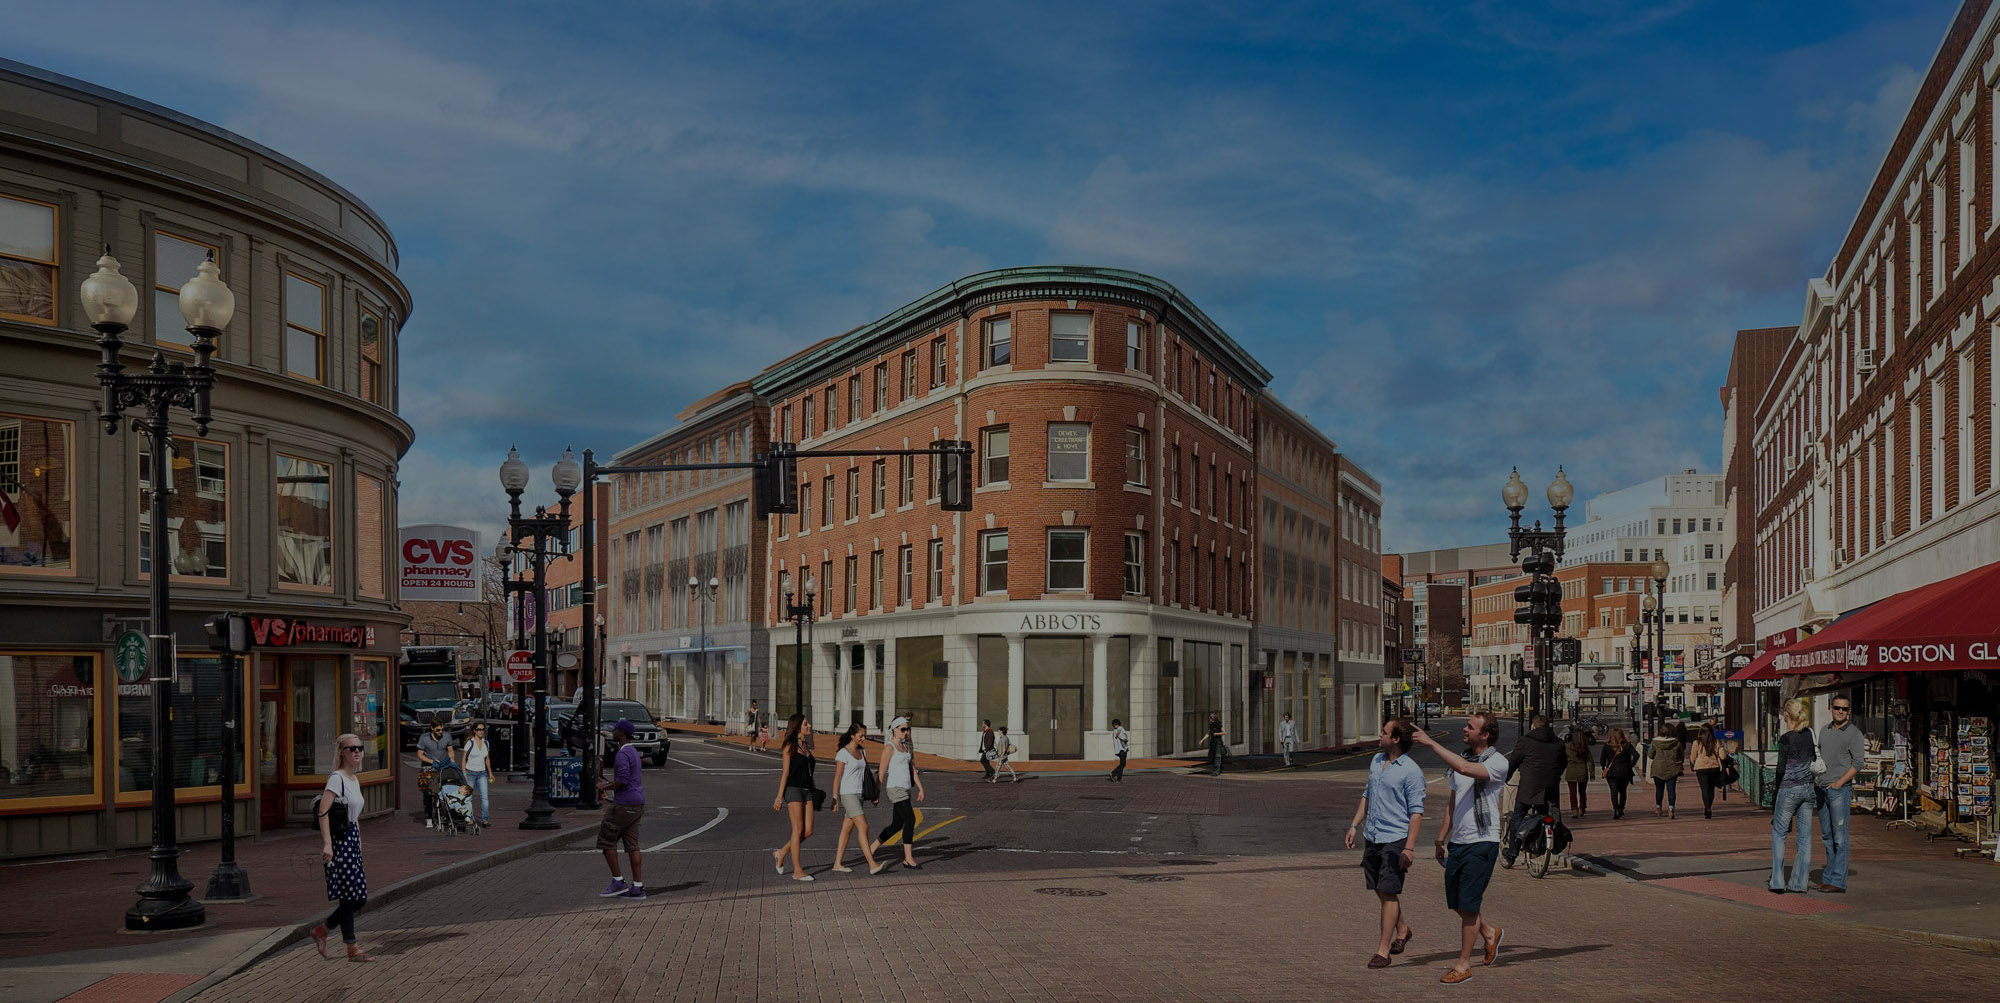 Aerial view of a rendered version of The Abbot brick building in Harvard Square, with pedestrians walking throughout the street and a dark overlay